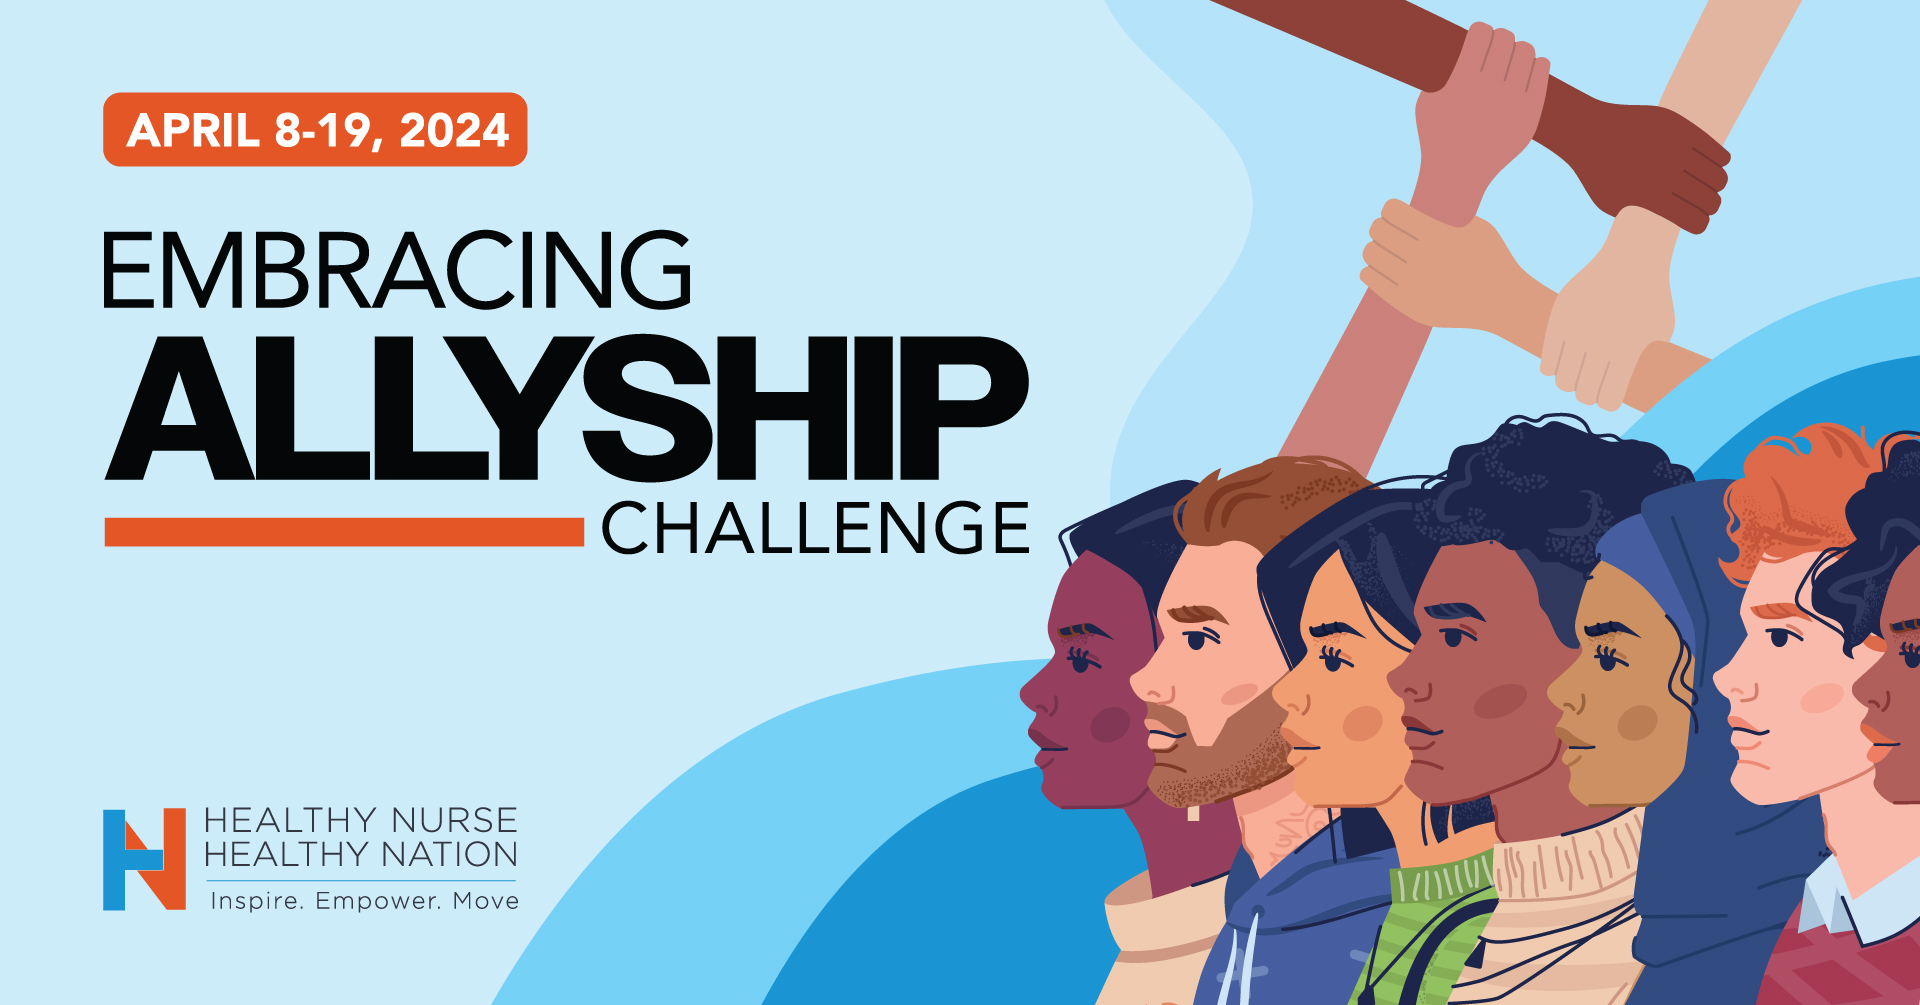 Use Your Voice to Lift Others - Healthy Nurse, Healthy Nation - Embracing Allyship Challenge - Day 6 4737